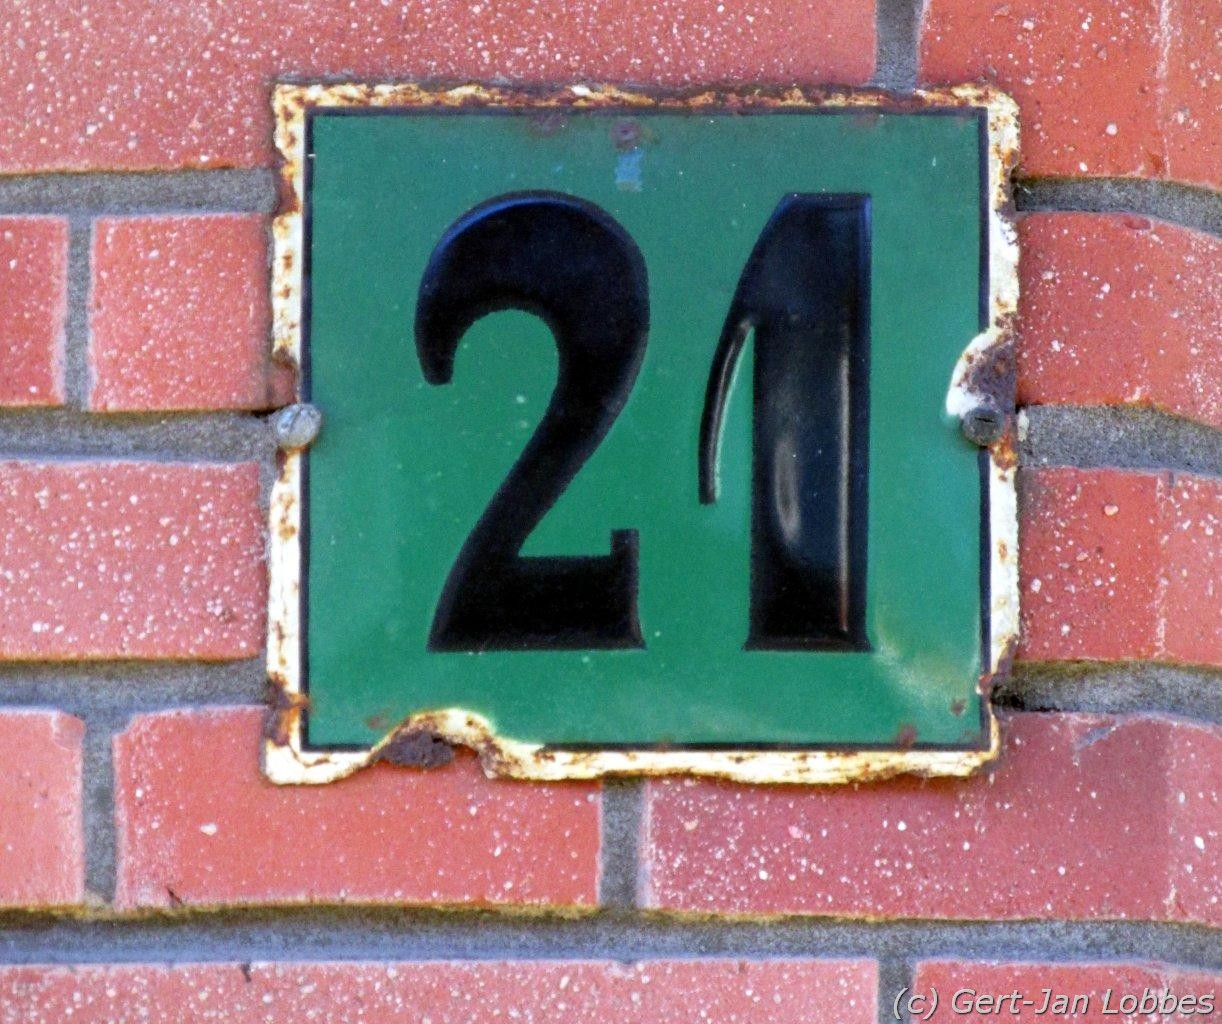 Bachstraat 21 (architect Rutgers)